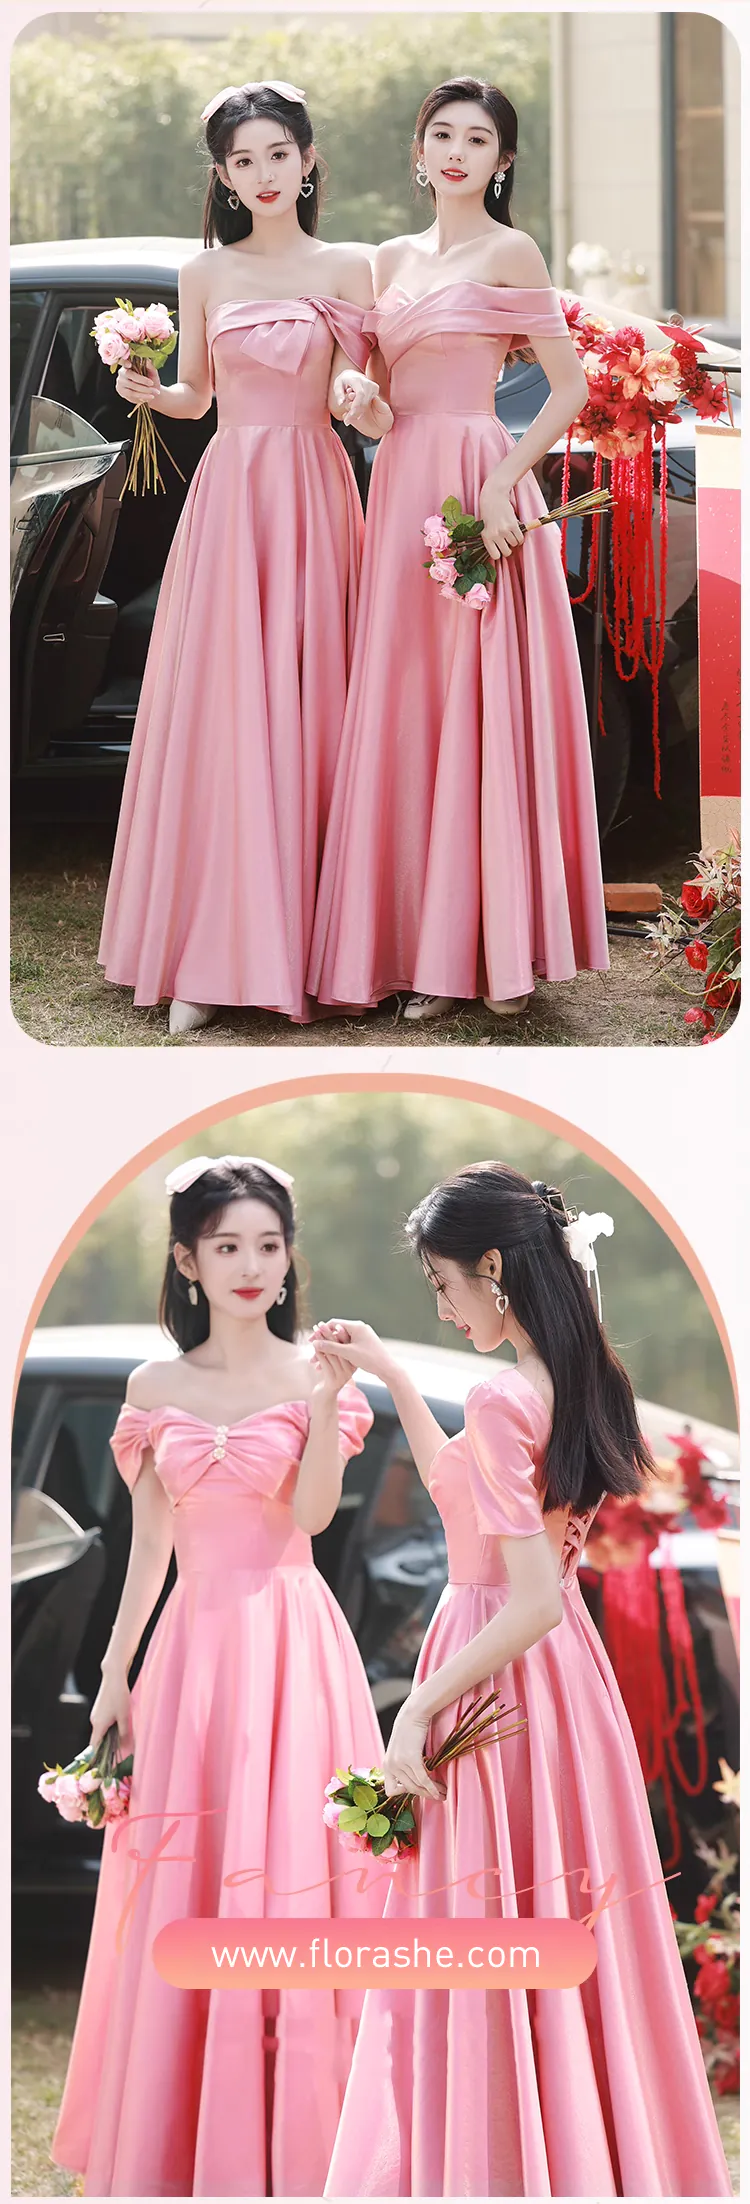 Charming-Pink-Satin-Bridesmaid-Dress-Short-Sleeve-Prom-Evening-Gown12